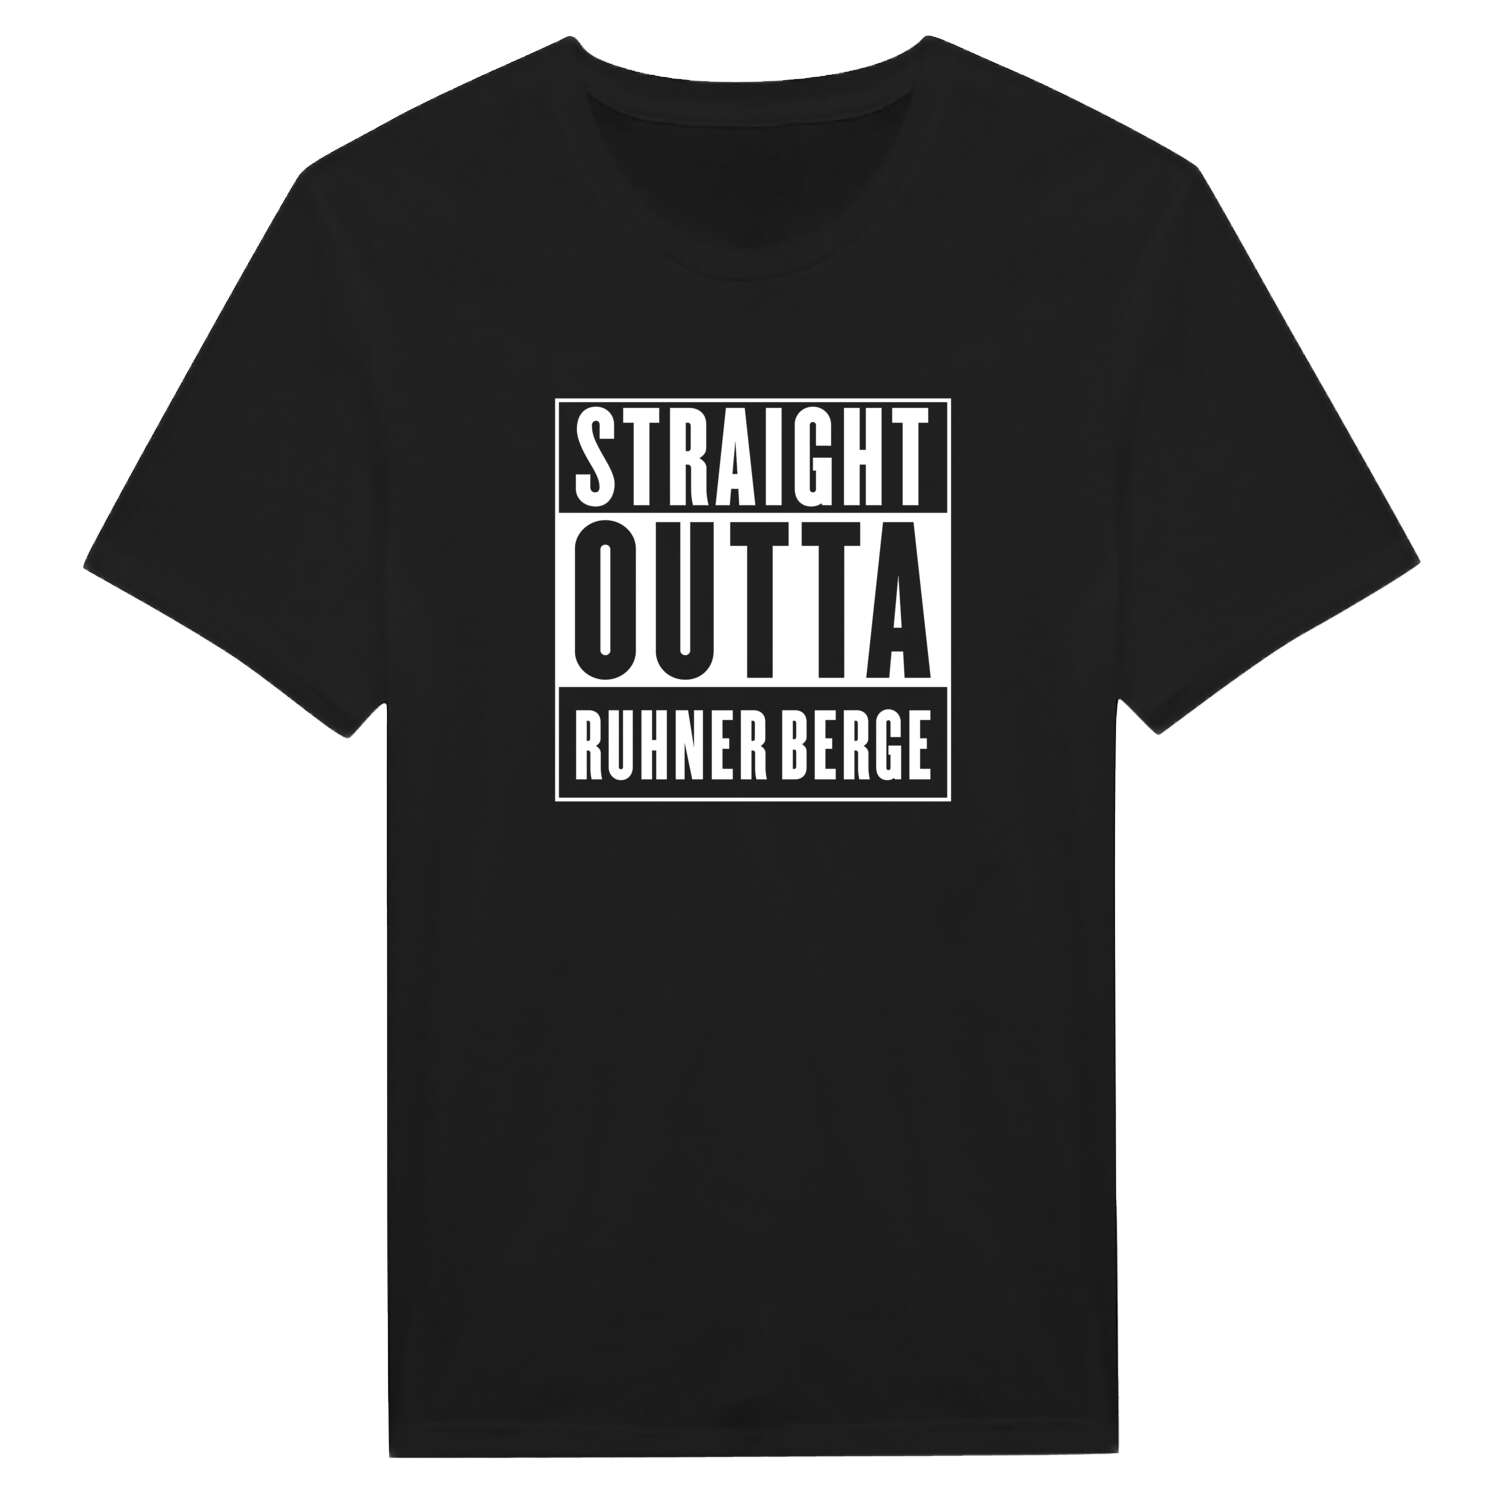 Ruhner Berge T-Shirt »Straight Outta«